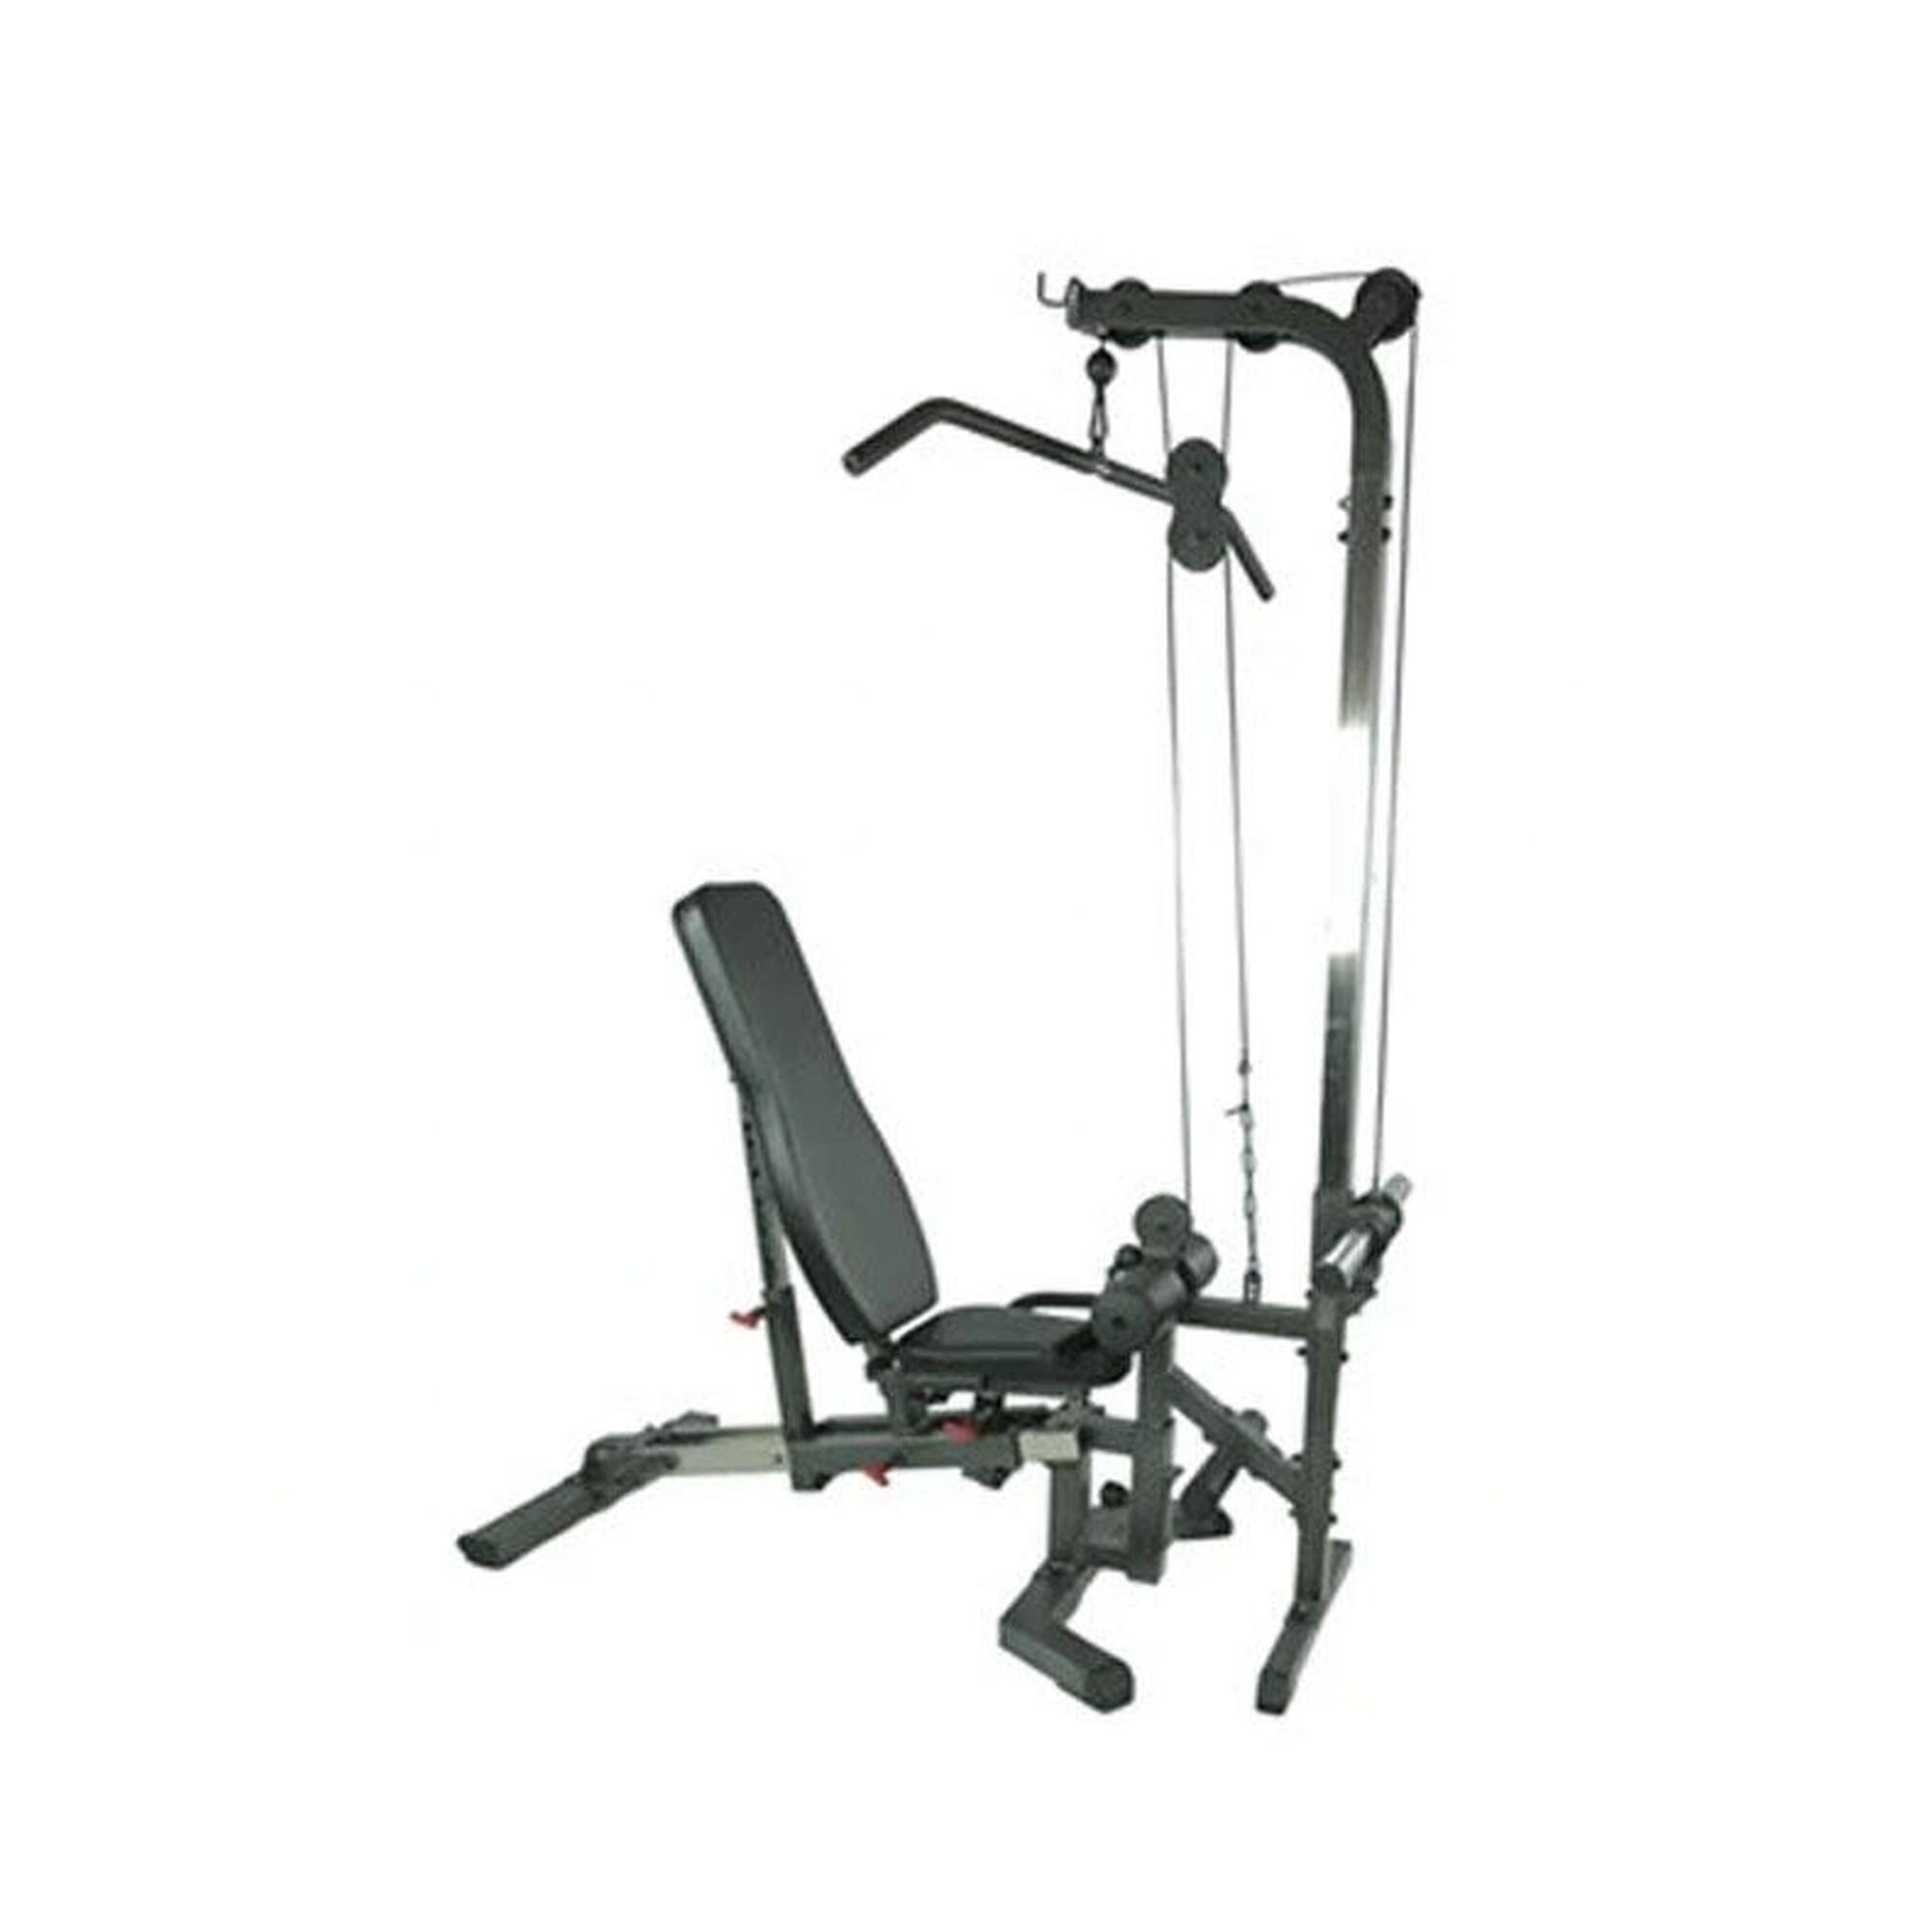 Accesorio Lat y Pull Down ION Fitness FI504GL